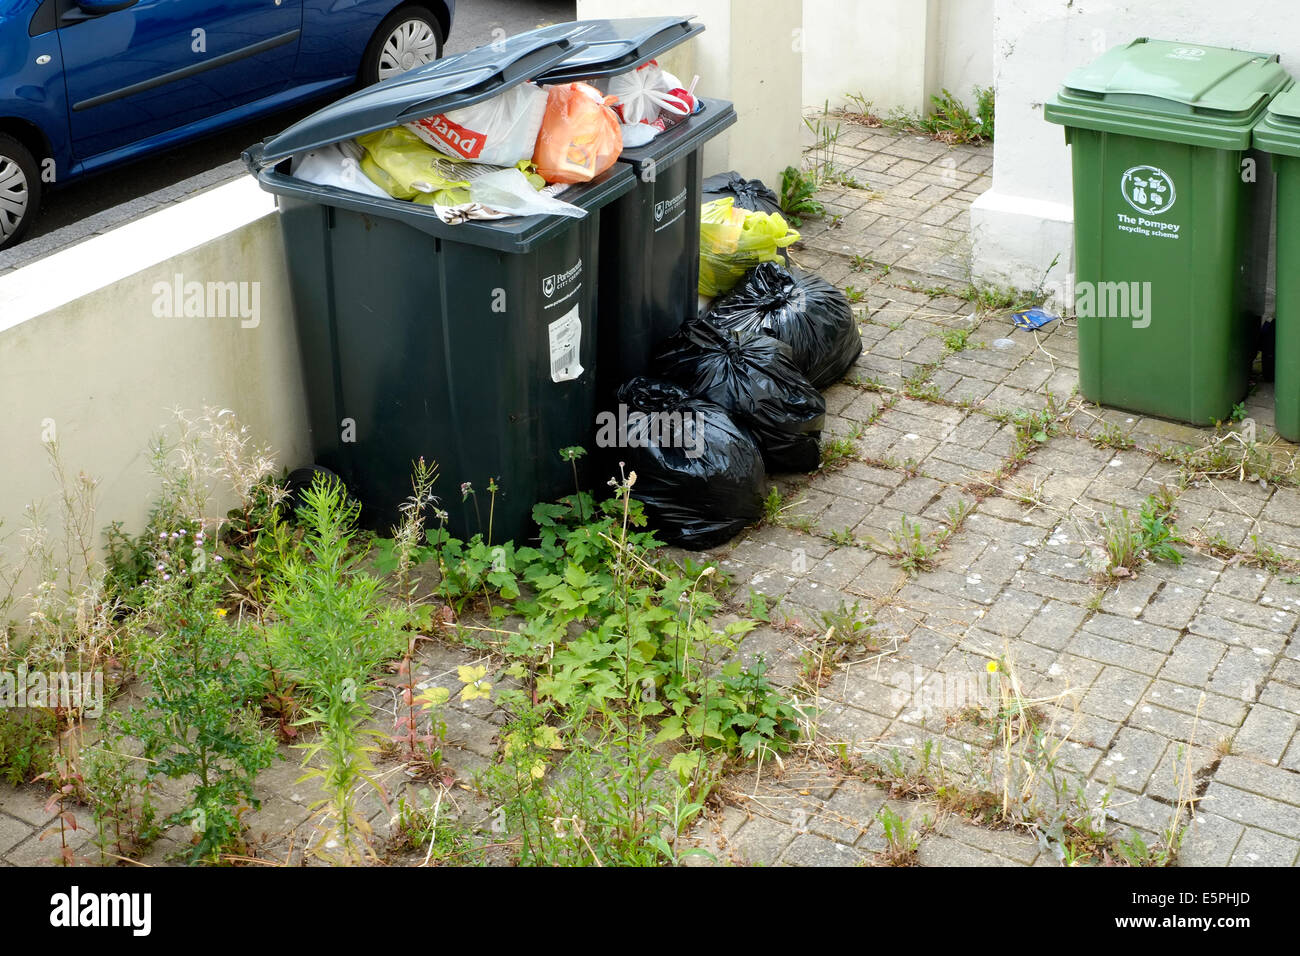 domestic wheelie bins overflowing with rubbish awaiting collection and emptying england uk Stock Photo